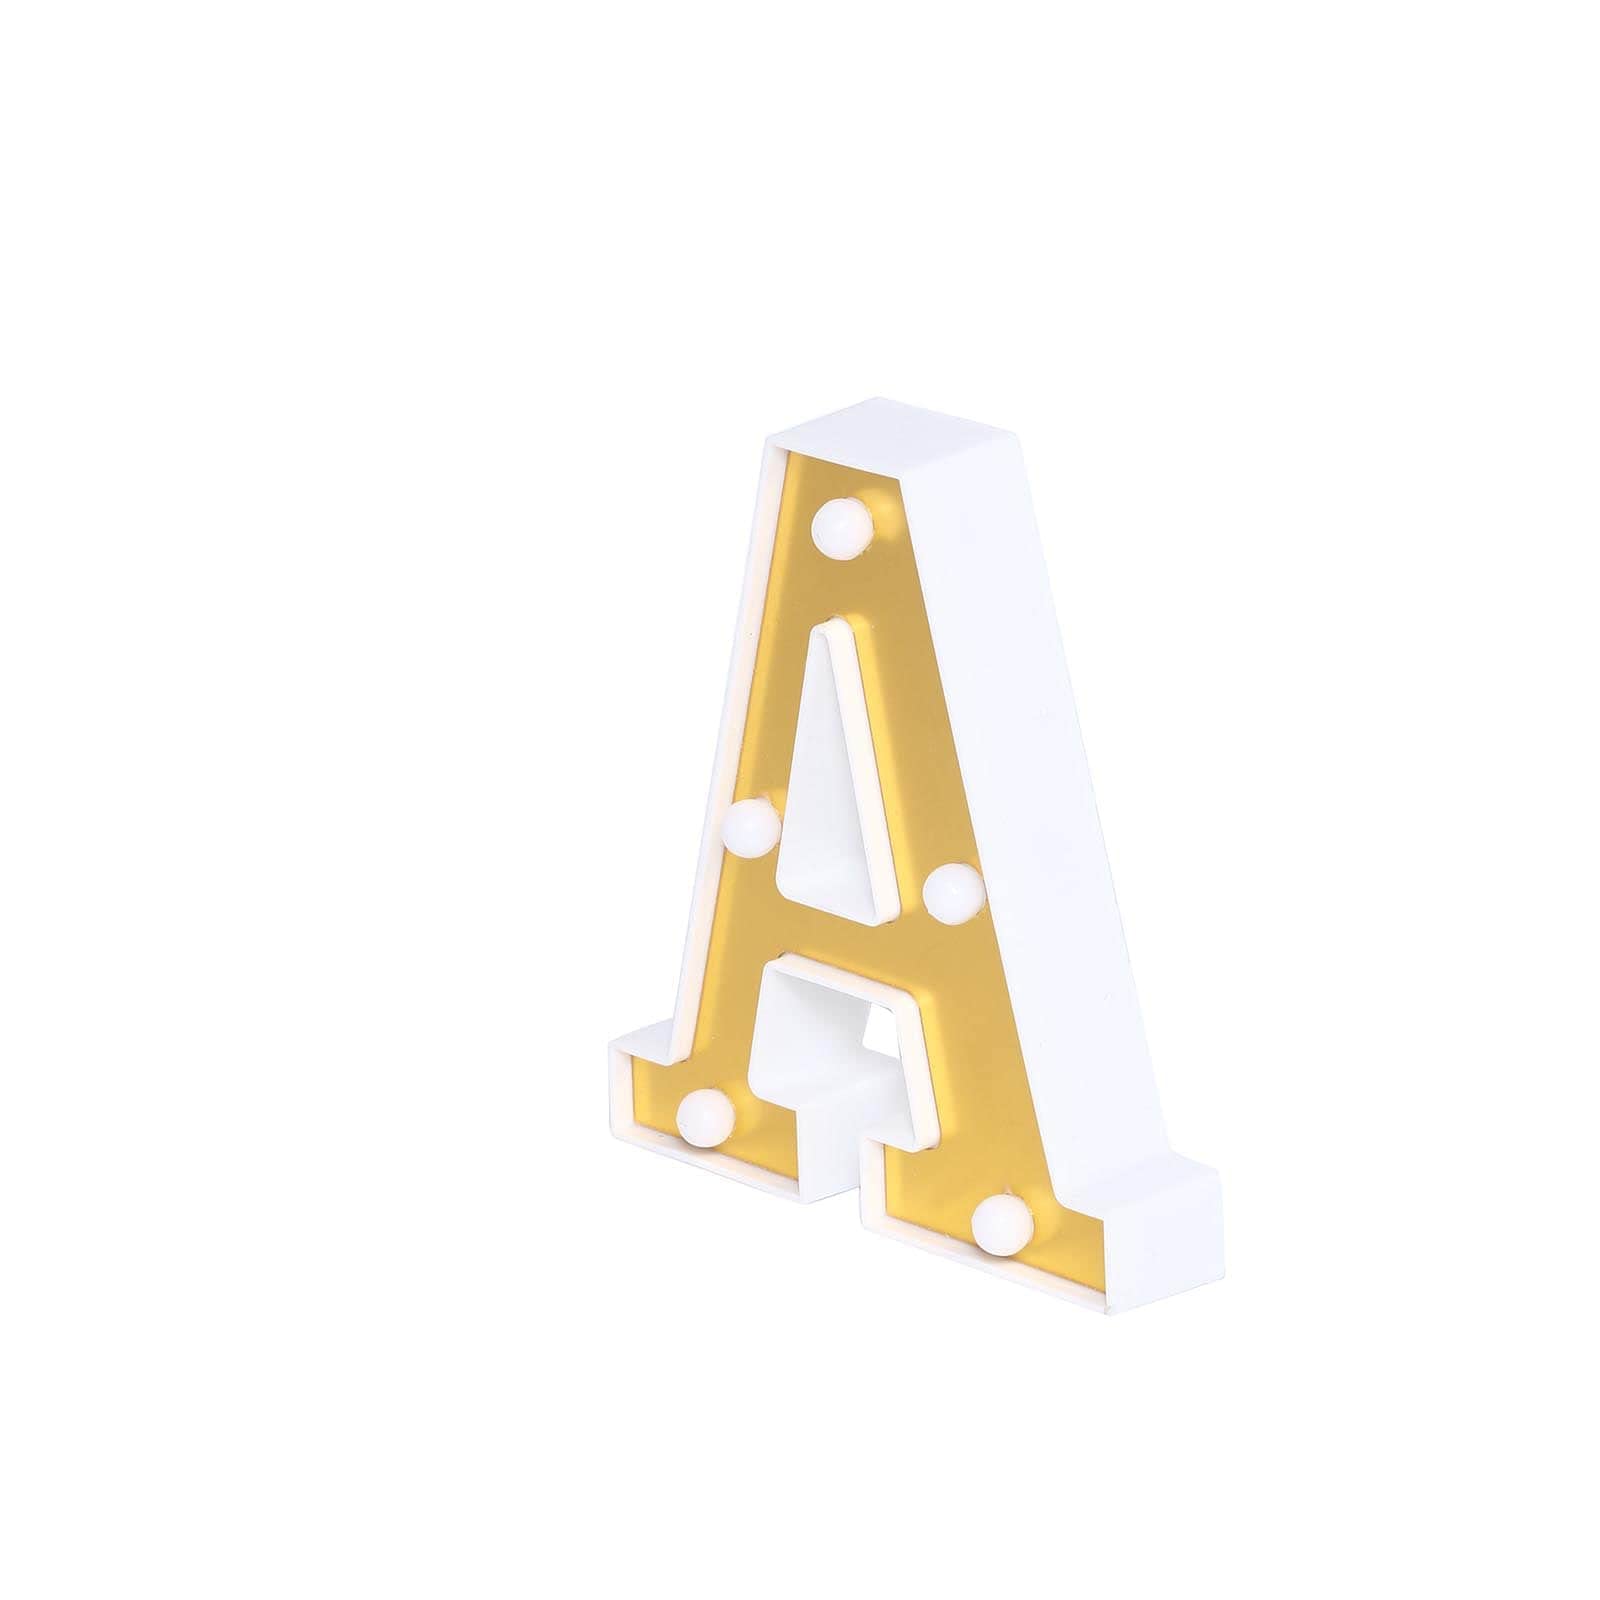 TABLECLOTHSFACTORY 6" 3D Gold Marquee Letters 5 LED Light Up Letters Warm White LED Letter Lights - A